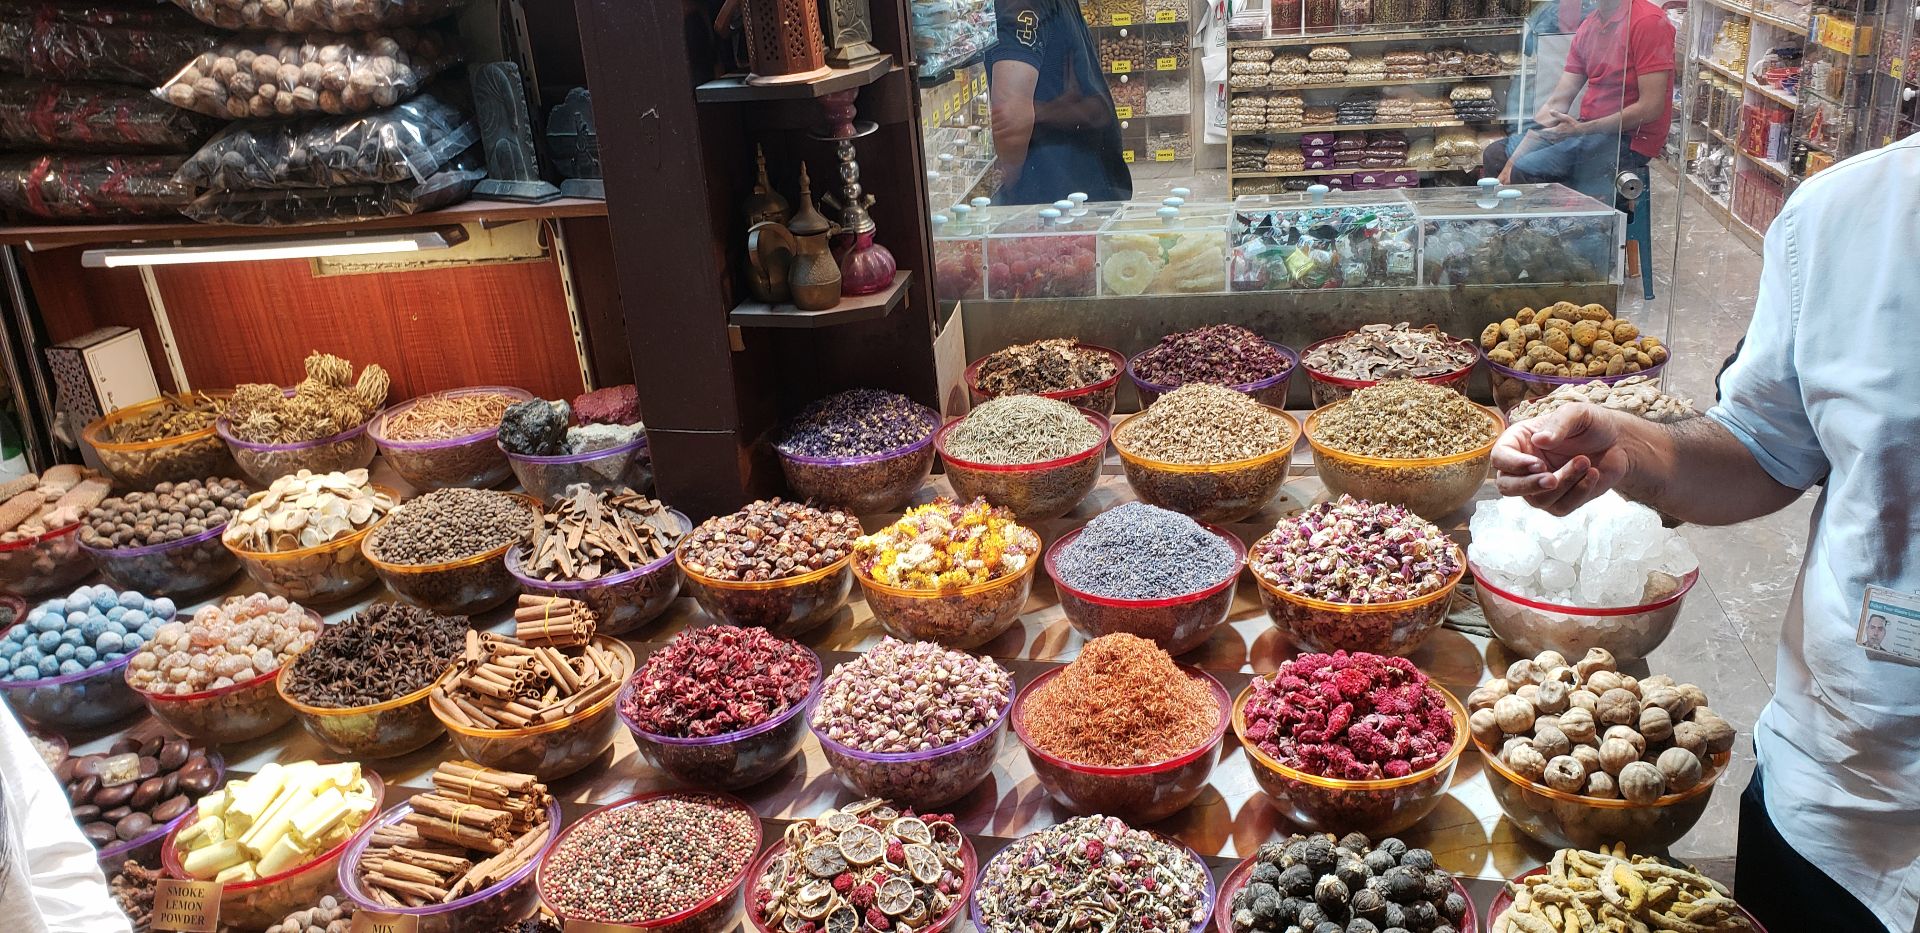 Colorful spices in the market of Old Dubai